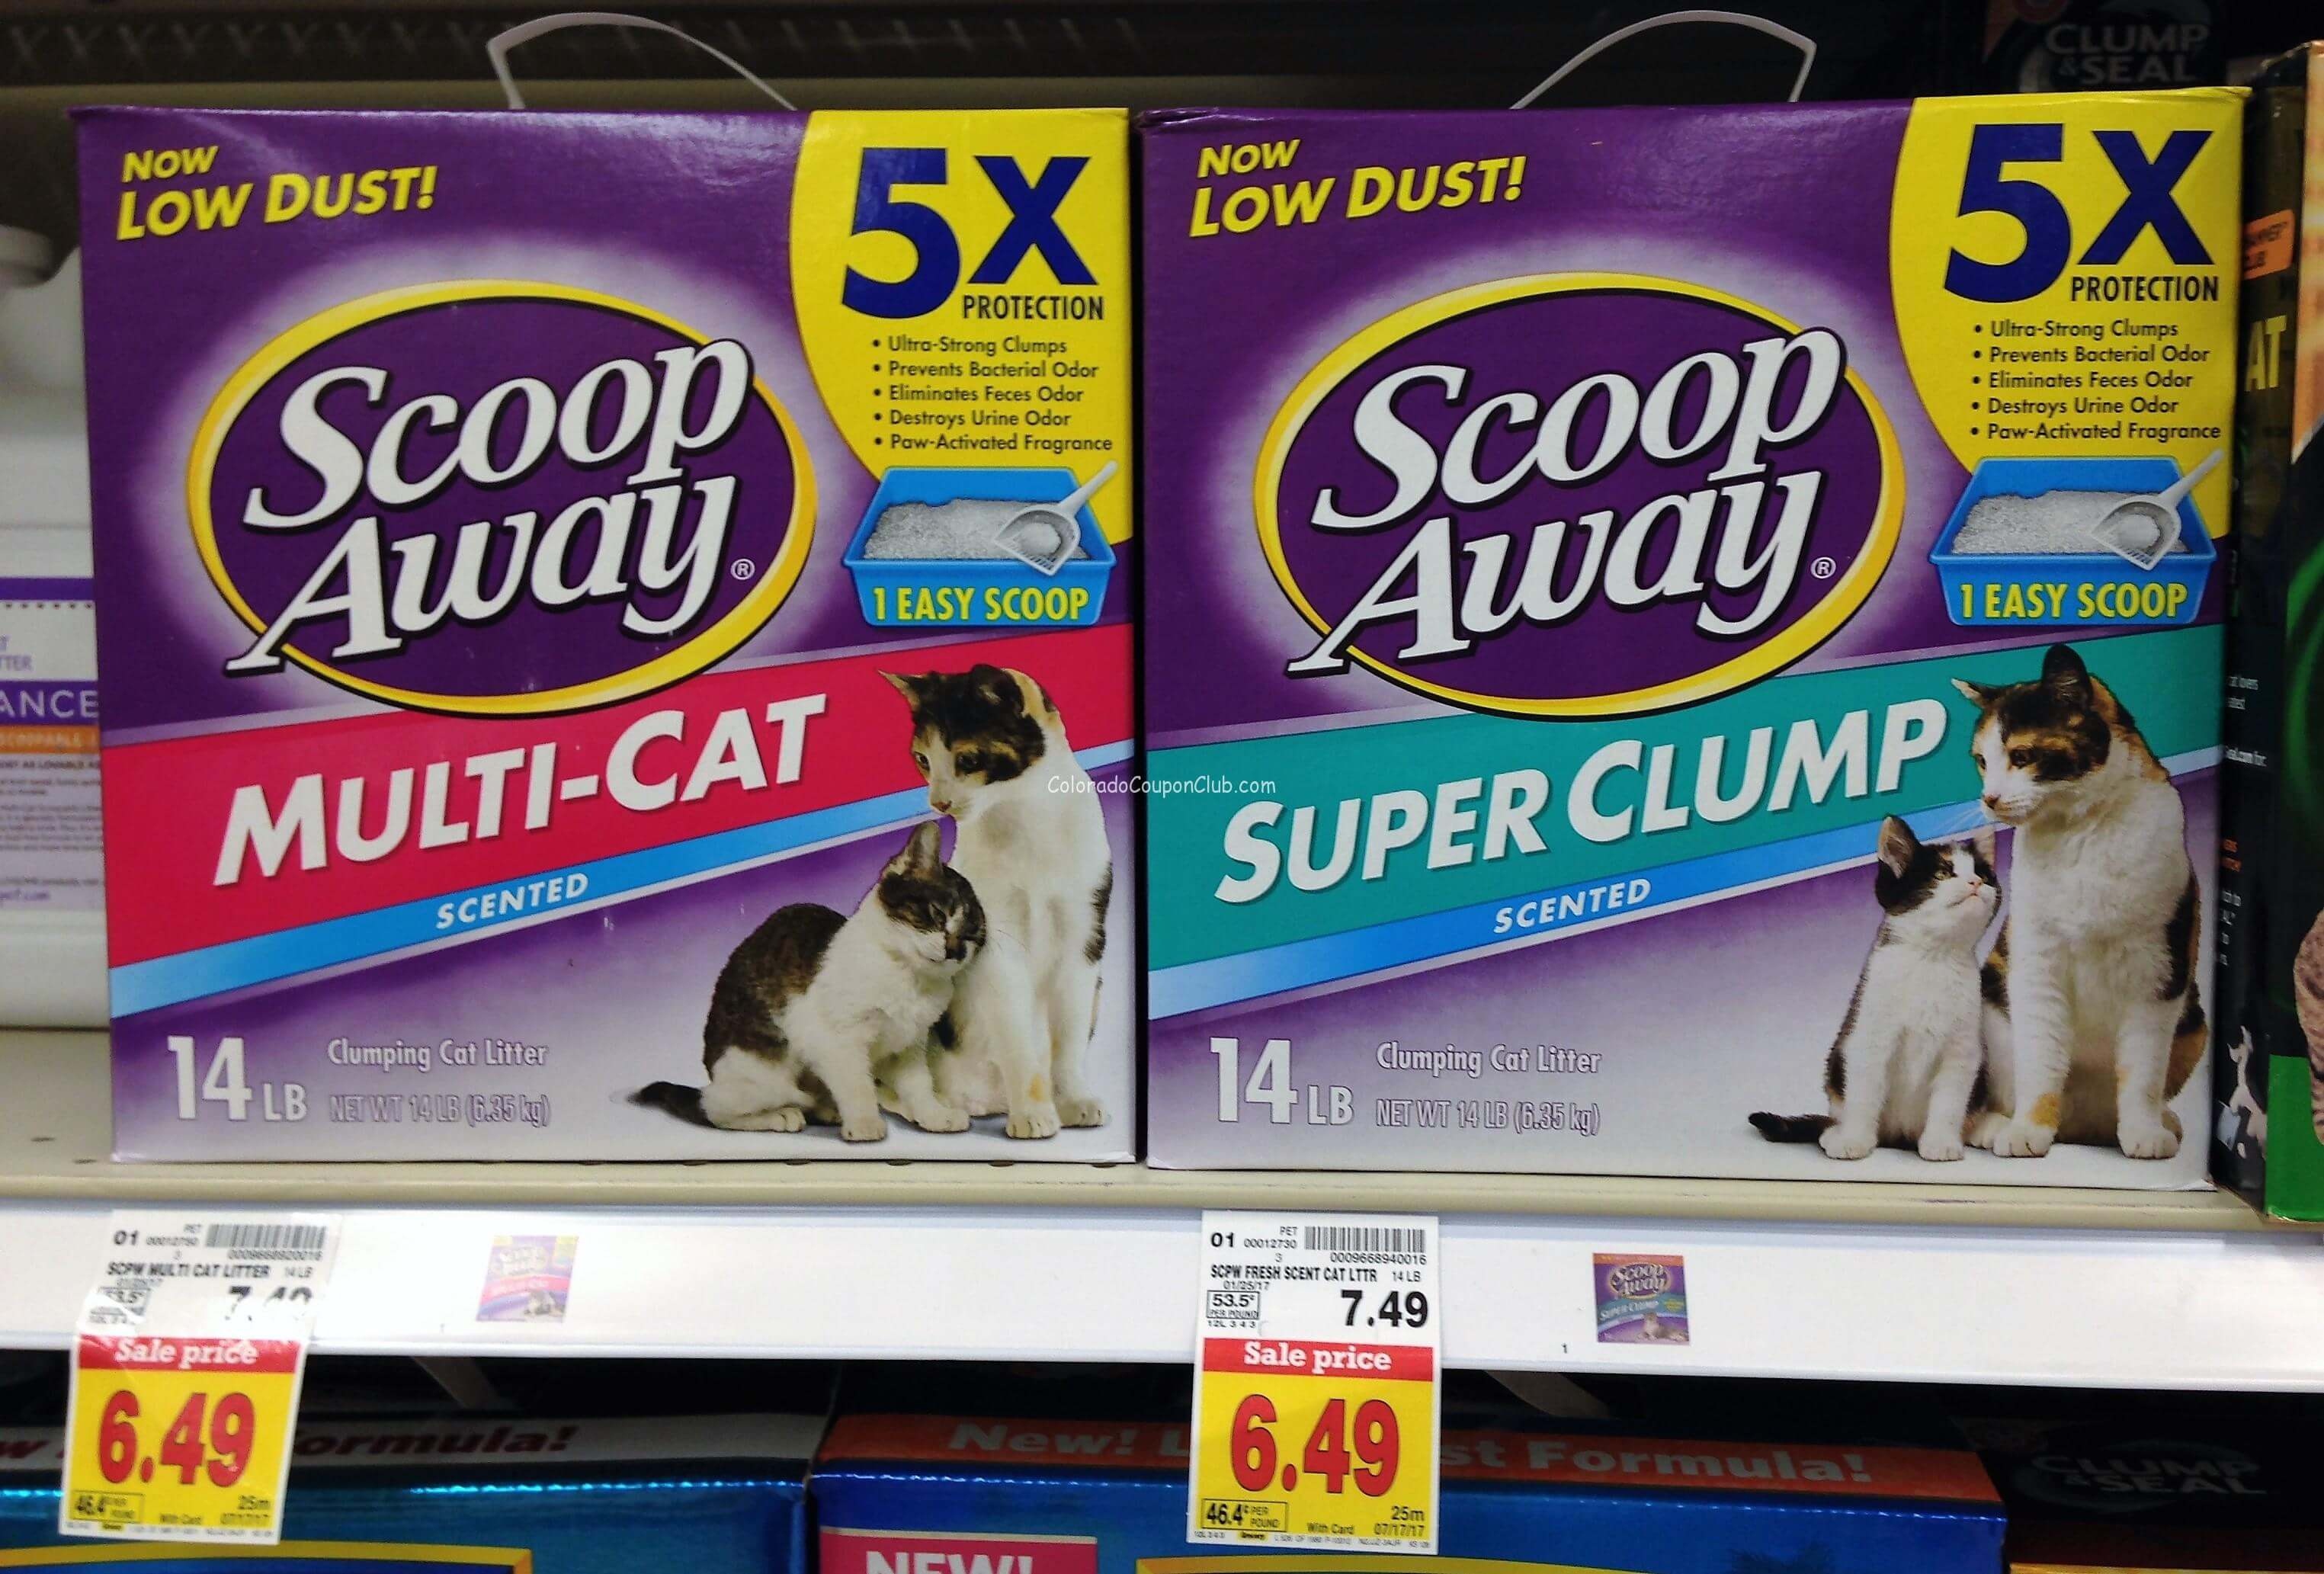 Scoop Away Cat Litter, Only $5.49 At King Soopers! - Colorado Coupon - Free Printable Scoop Away Coupons